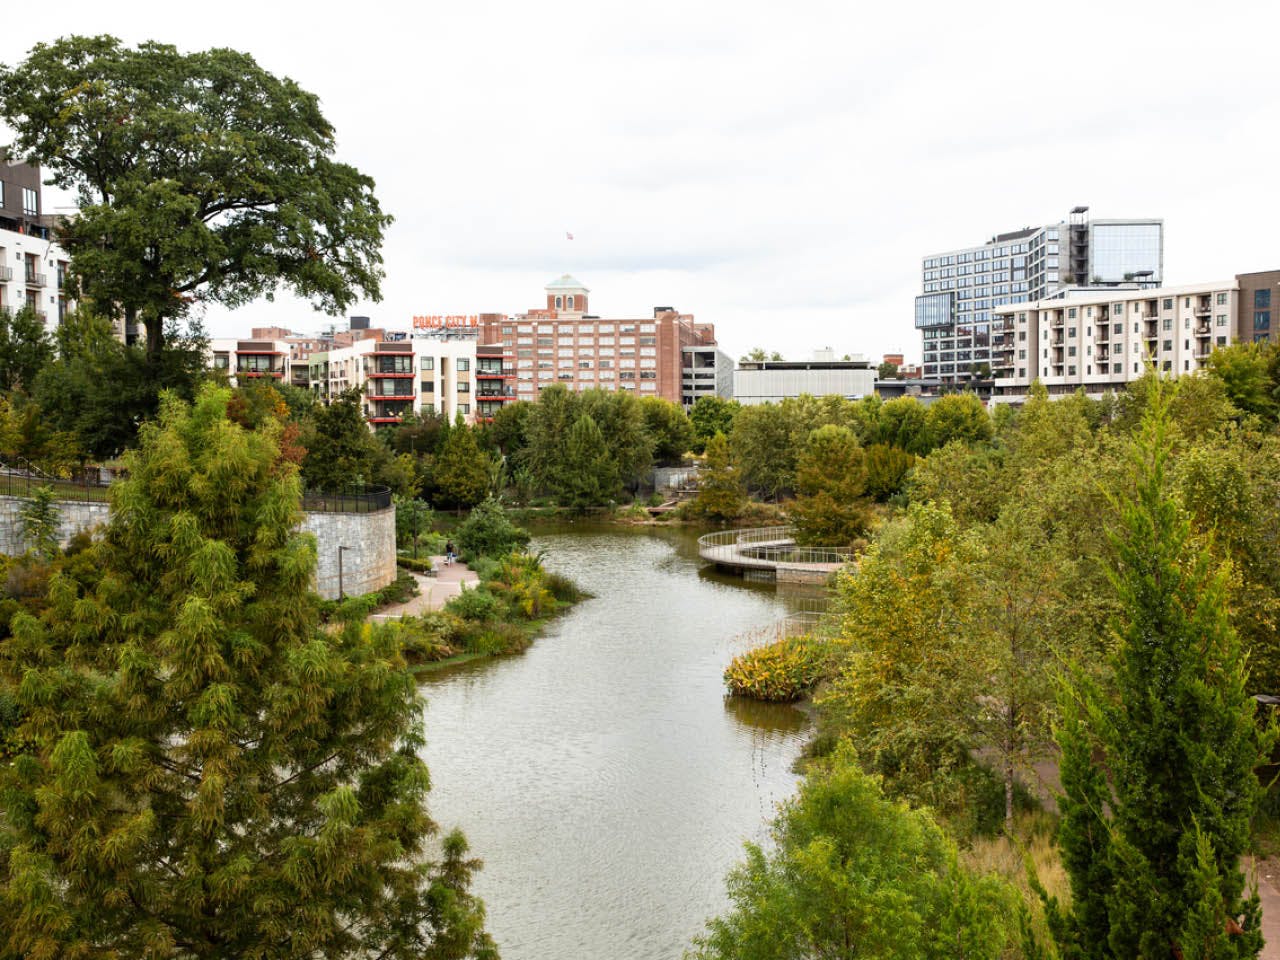 A view of Ponce City Market from across the lake at Historic Fourth Ward Park. (Photo Credit: Erin Sintos)